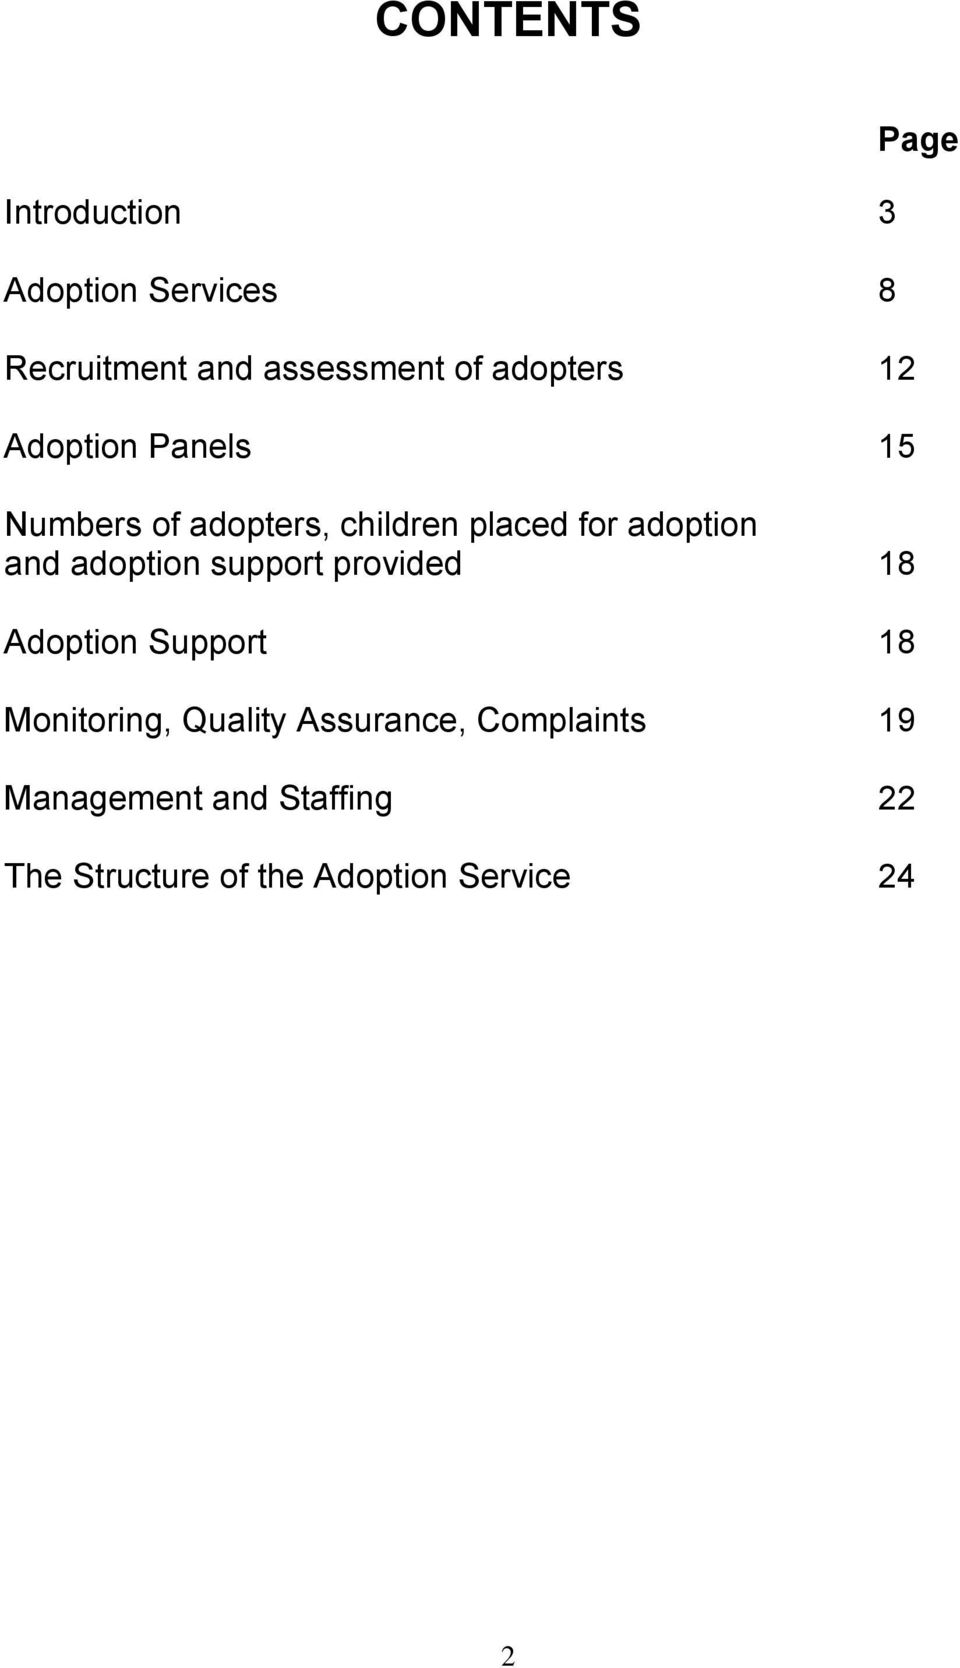 and adoption support provided 18 Adoption Support 18 Monitoring, Quality